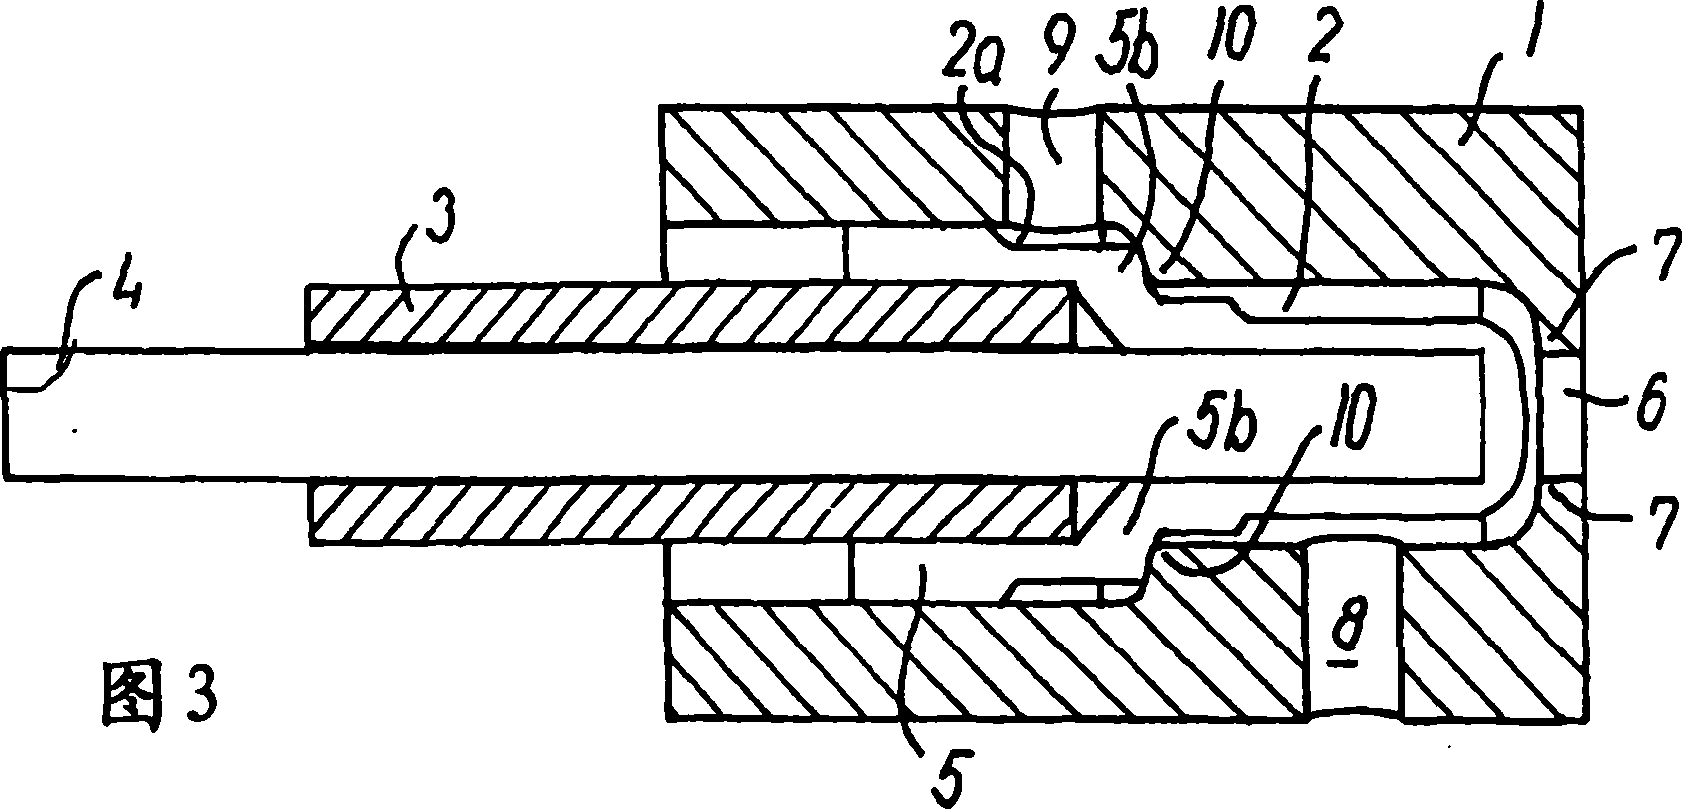 Valve for sterile sampling of a liquid sample from a container